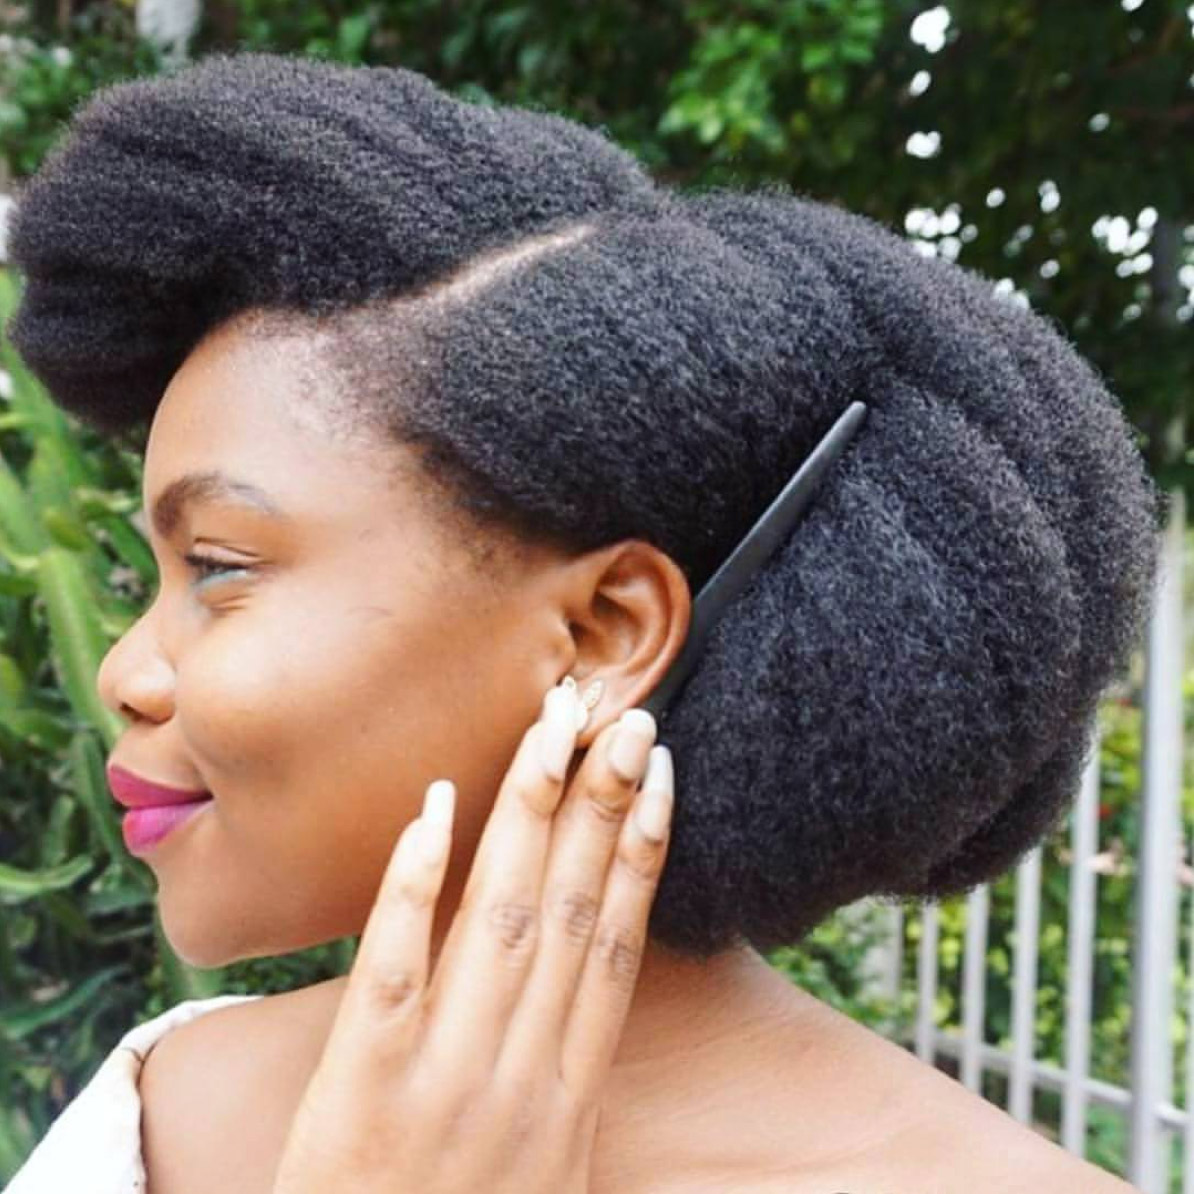 Looking Good: 5 Natural Hairstyles For Summer Dates